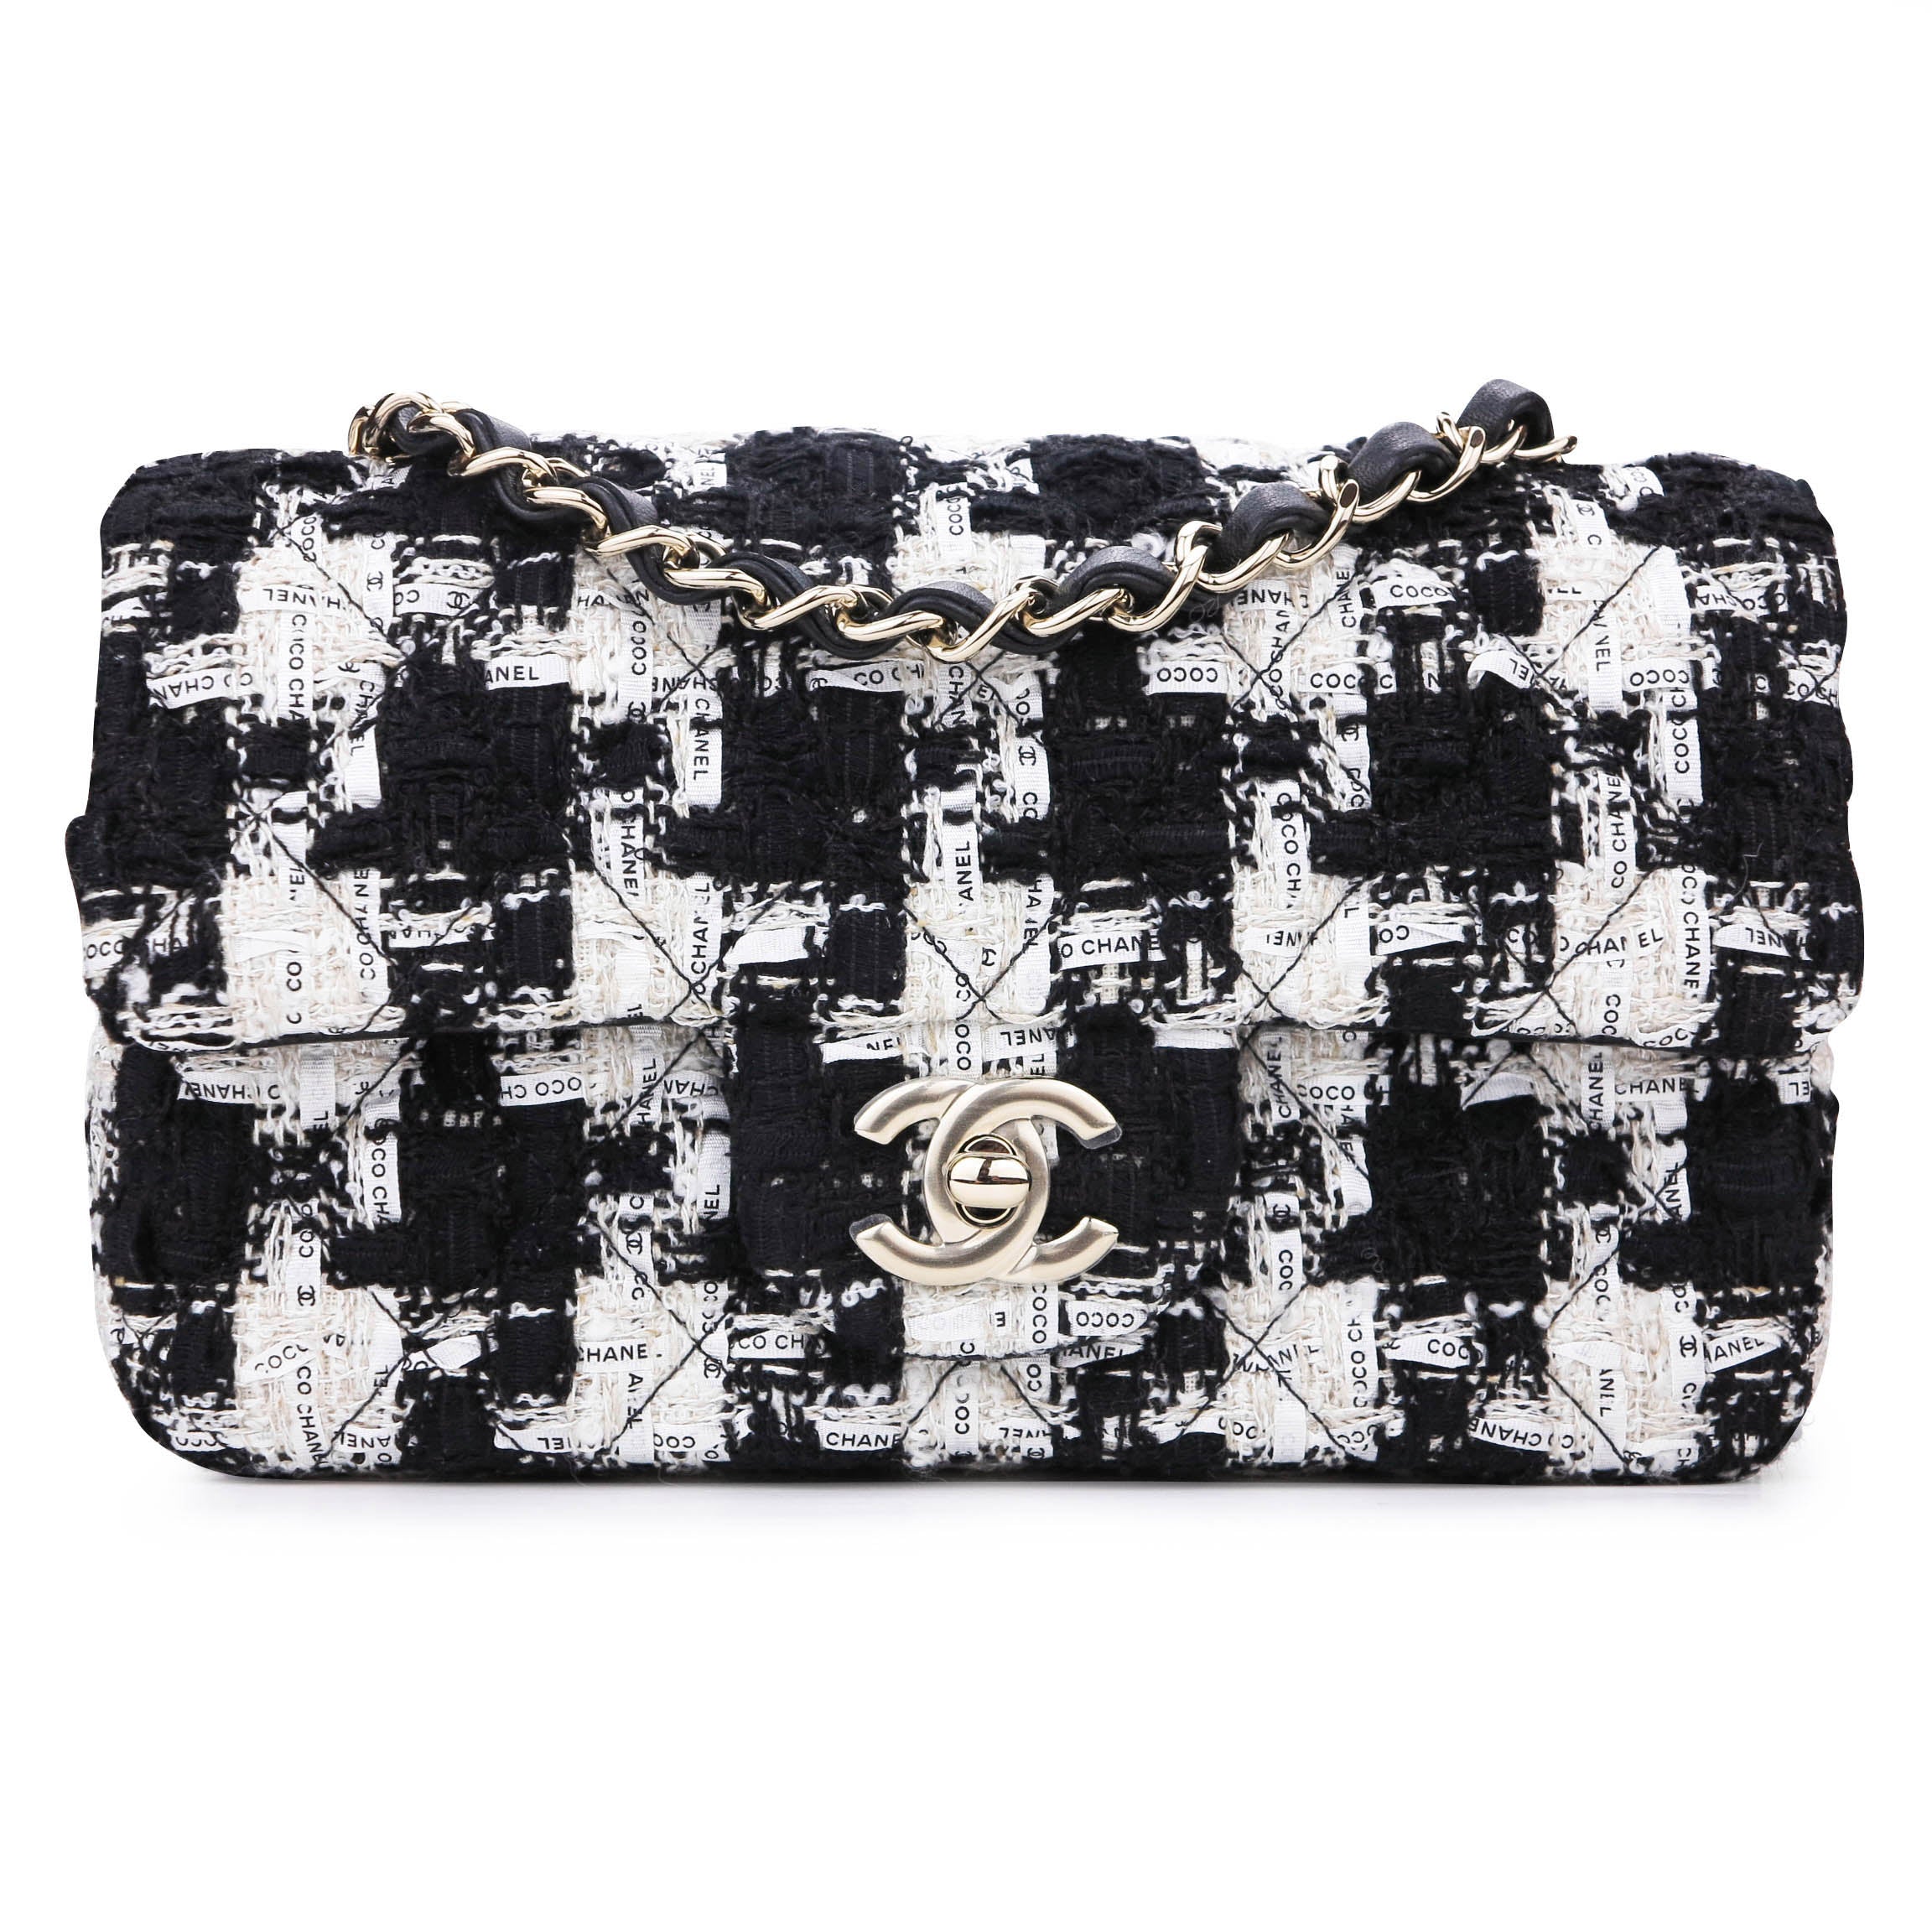 20SS Houndstooth Tweed Mini Rectangular Flap Bag in Black and White